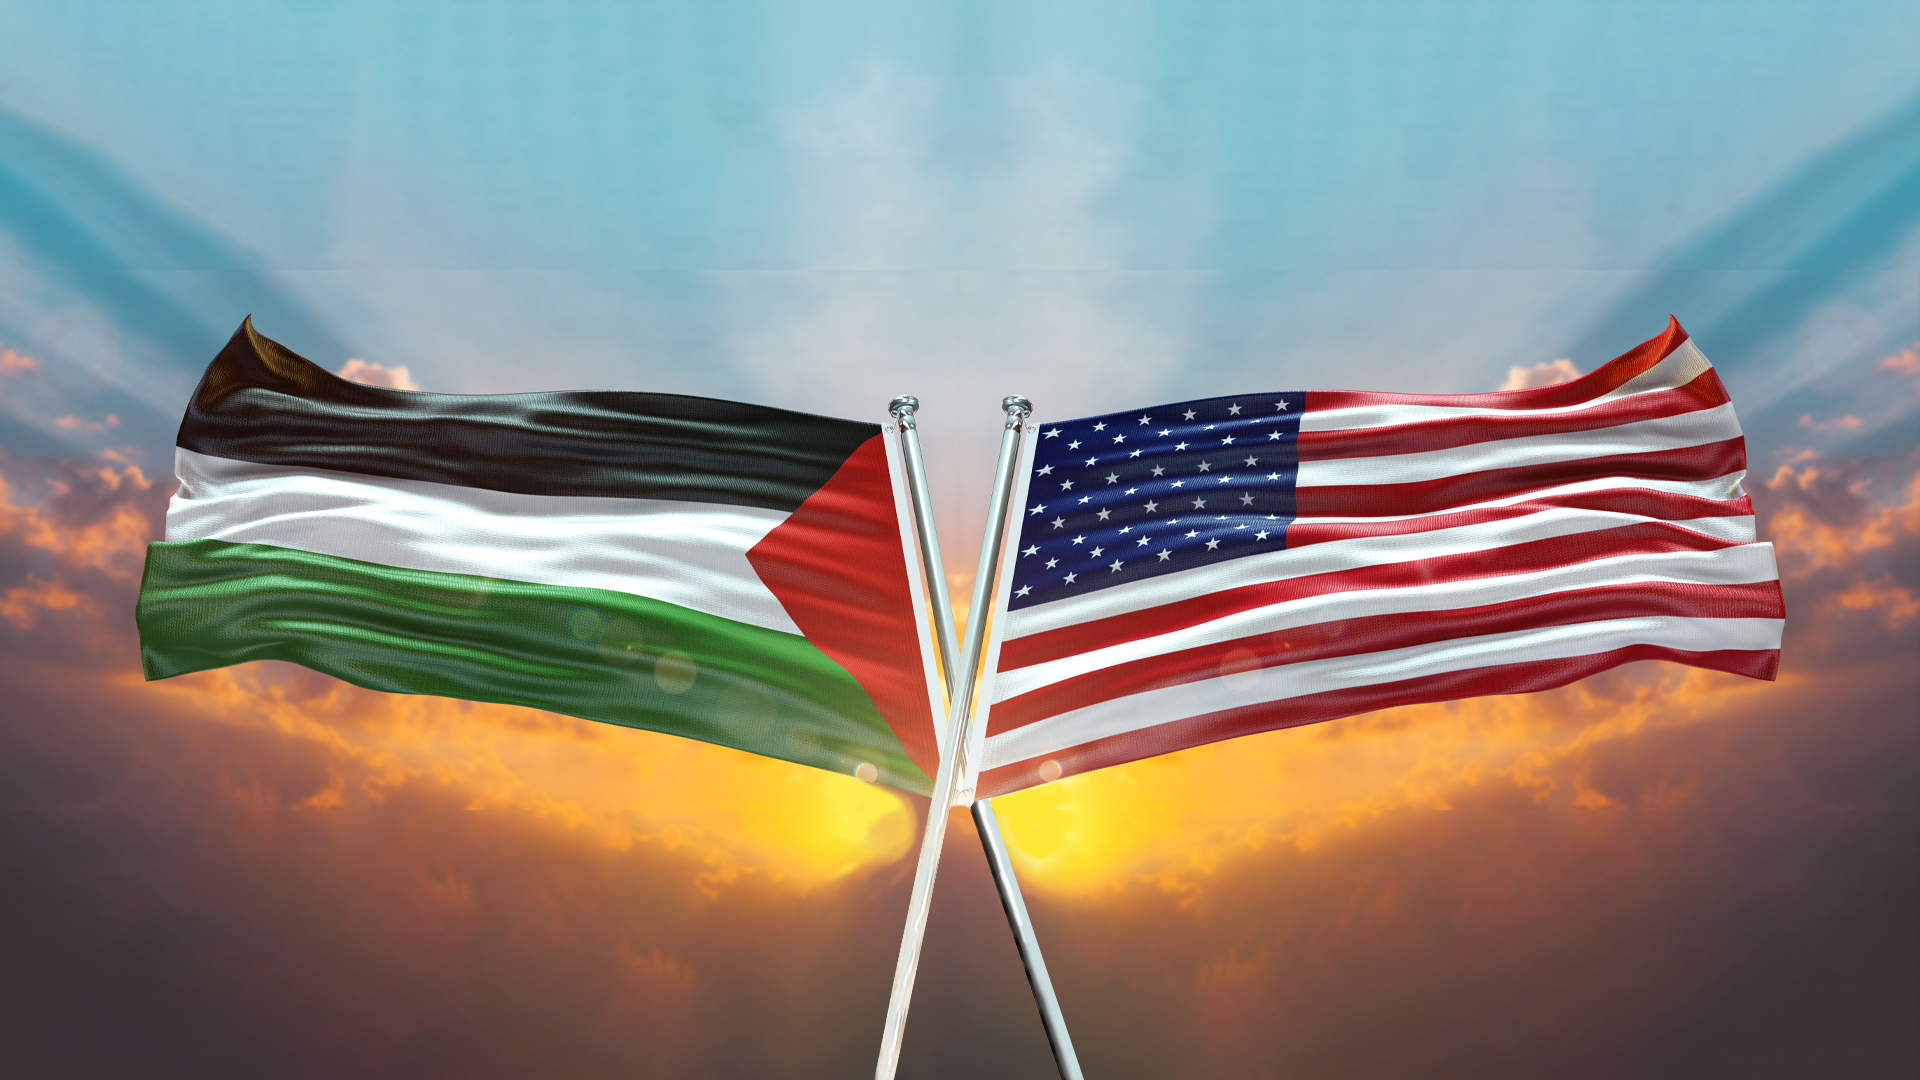 Double Flag United States of America vs Palestine flag waving flag with texture sky clouds and sunset background